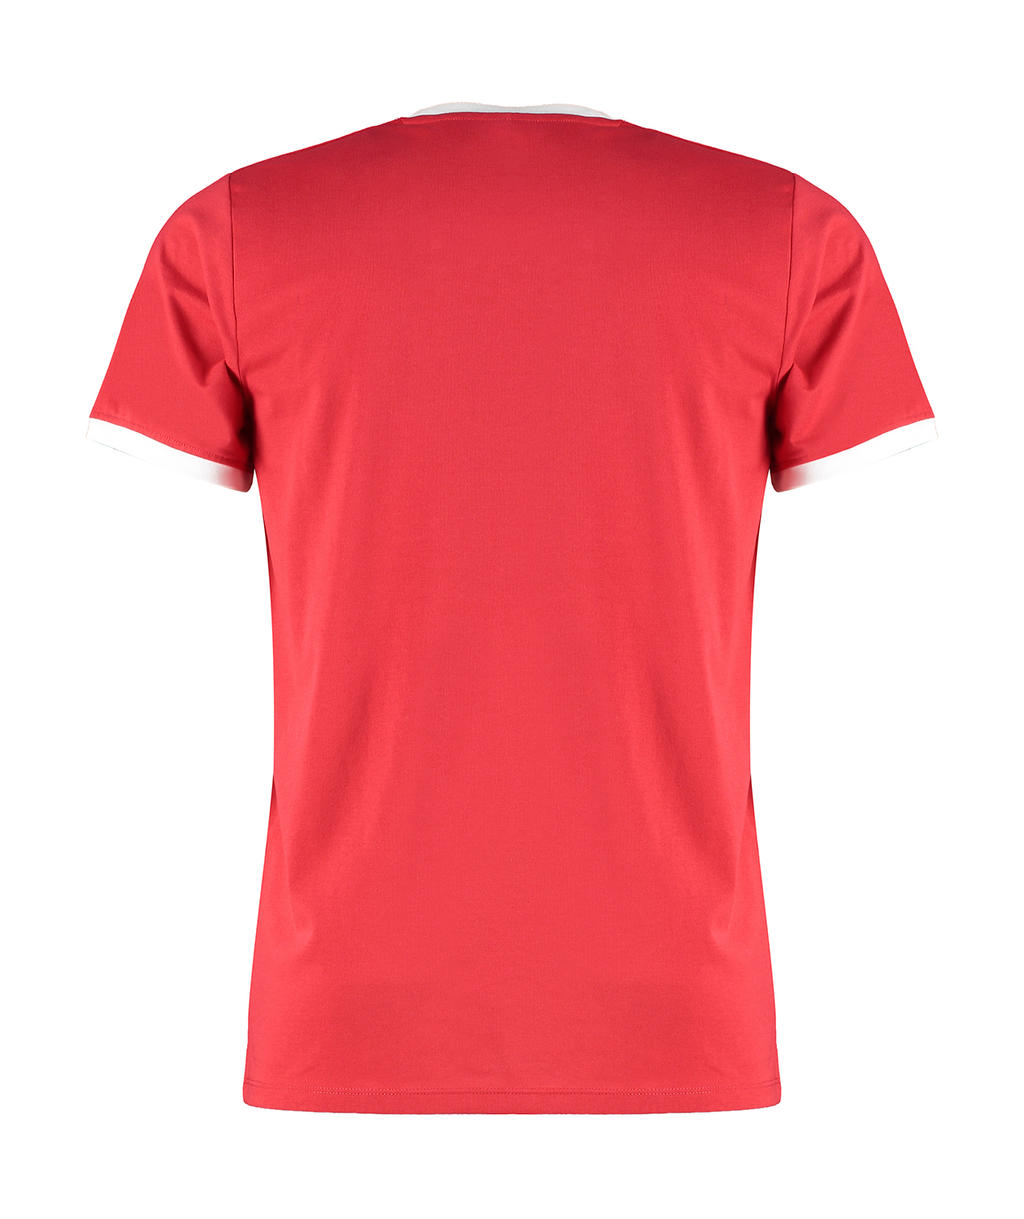  Fashion Fit Ringer Tee in Farbe Red/White